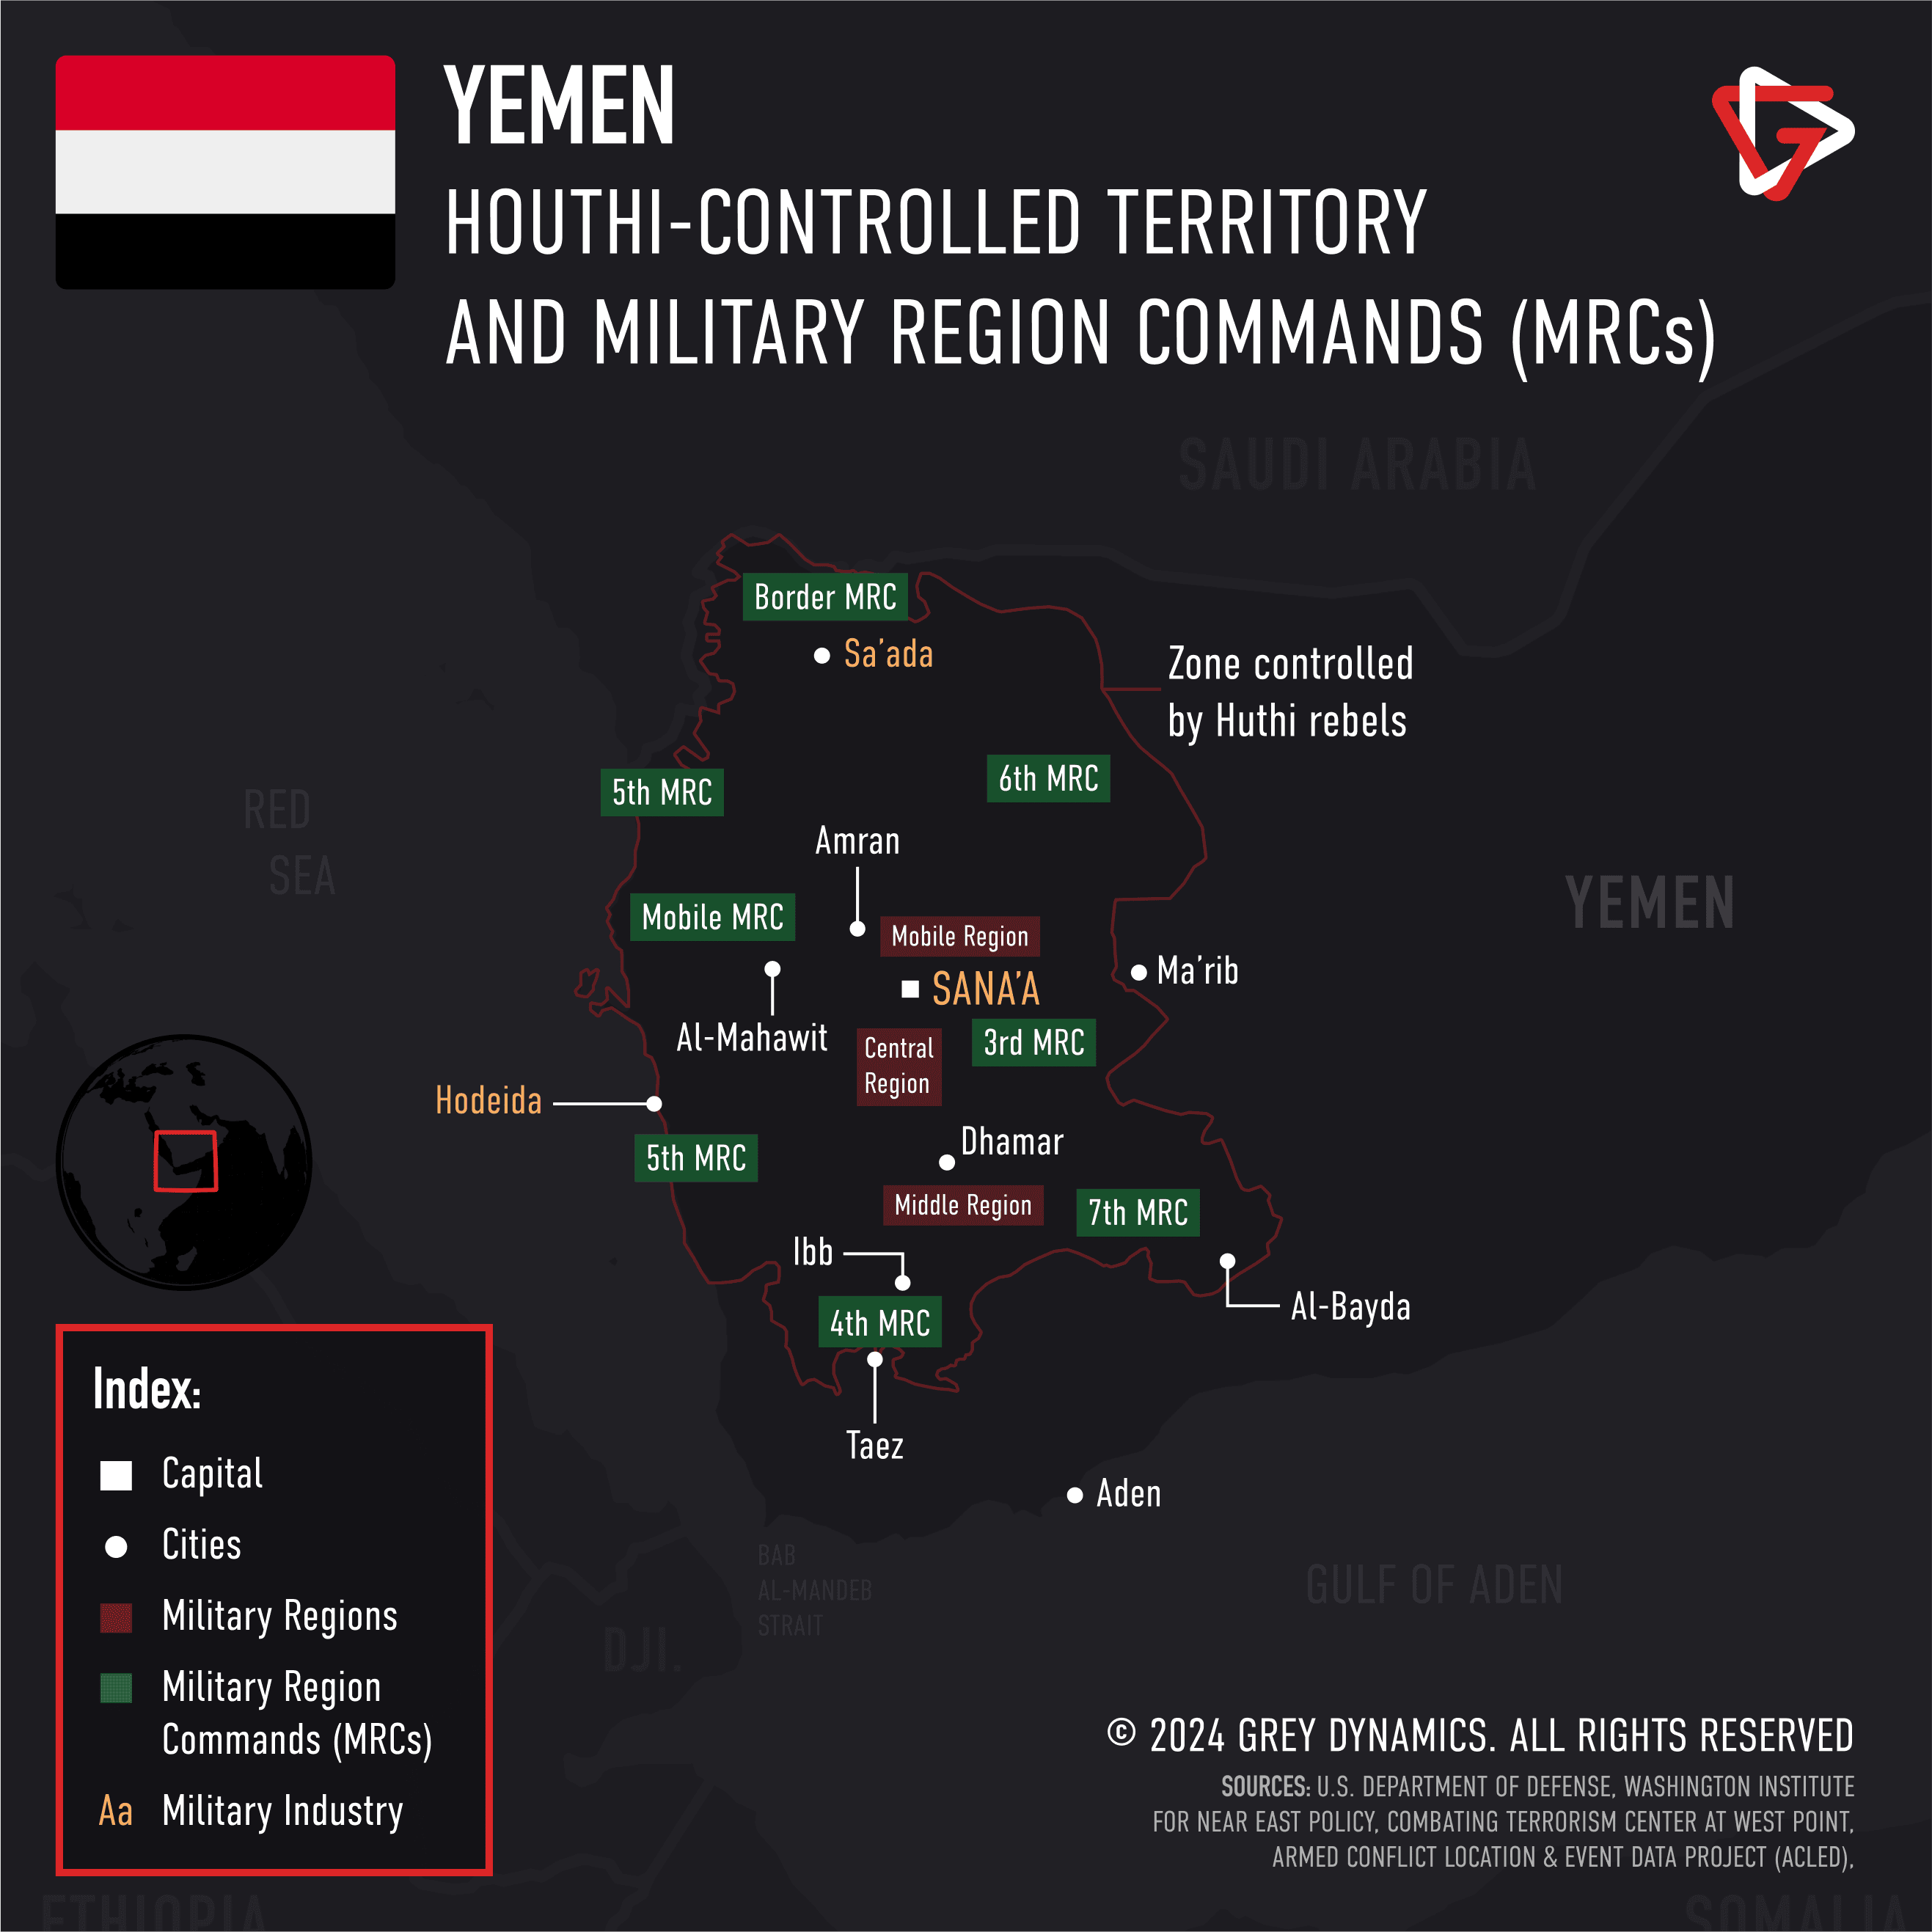 Houthi-controlled (Ansar Allah) territory and the Organisation's Military Regional Commands.